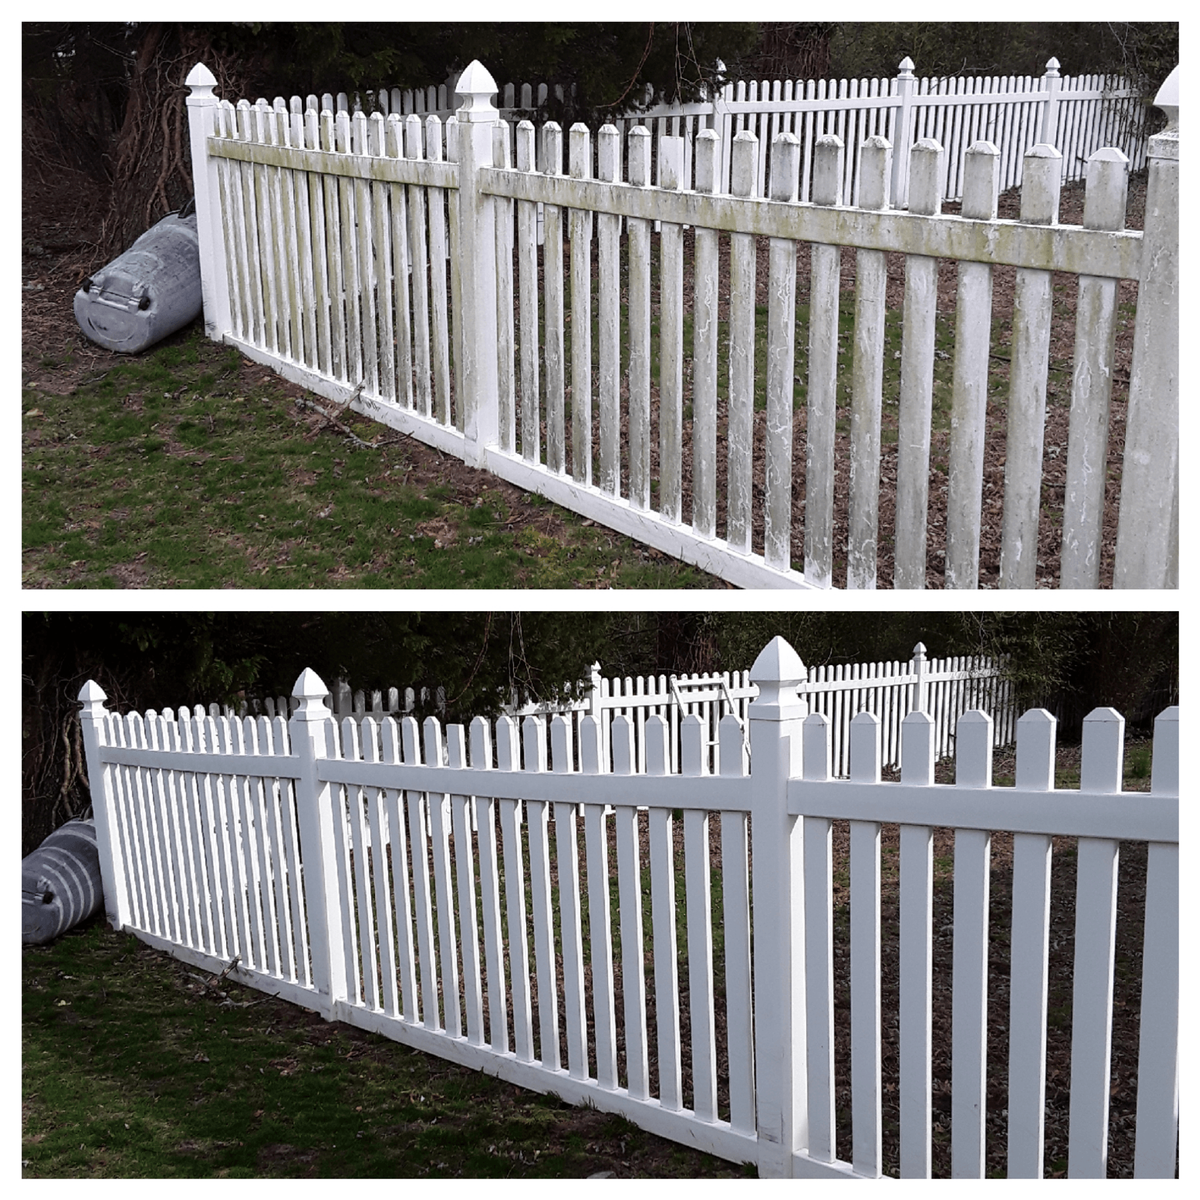 Fence Washing for Curb Appeal Power Washing in Waretown, New Jersey